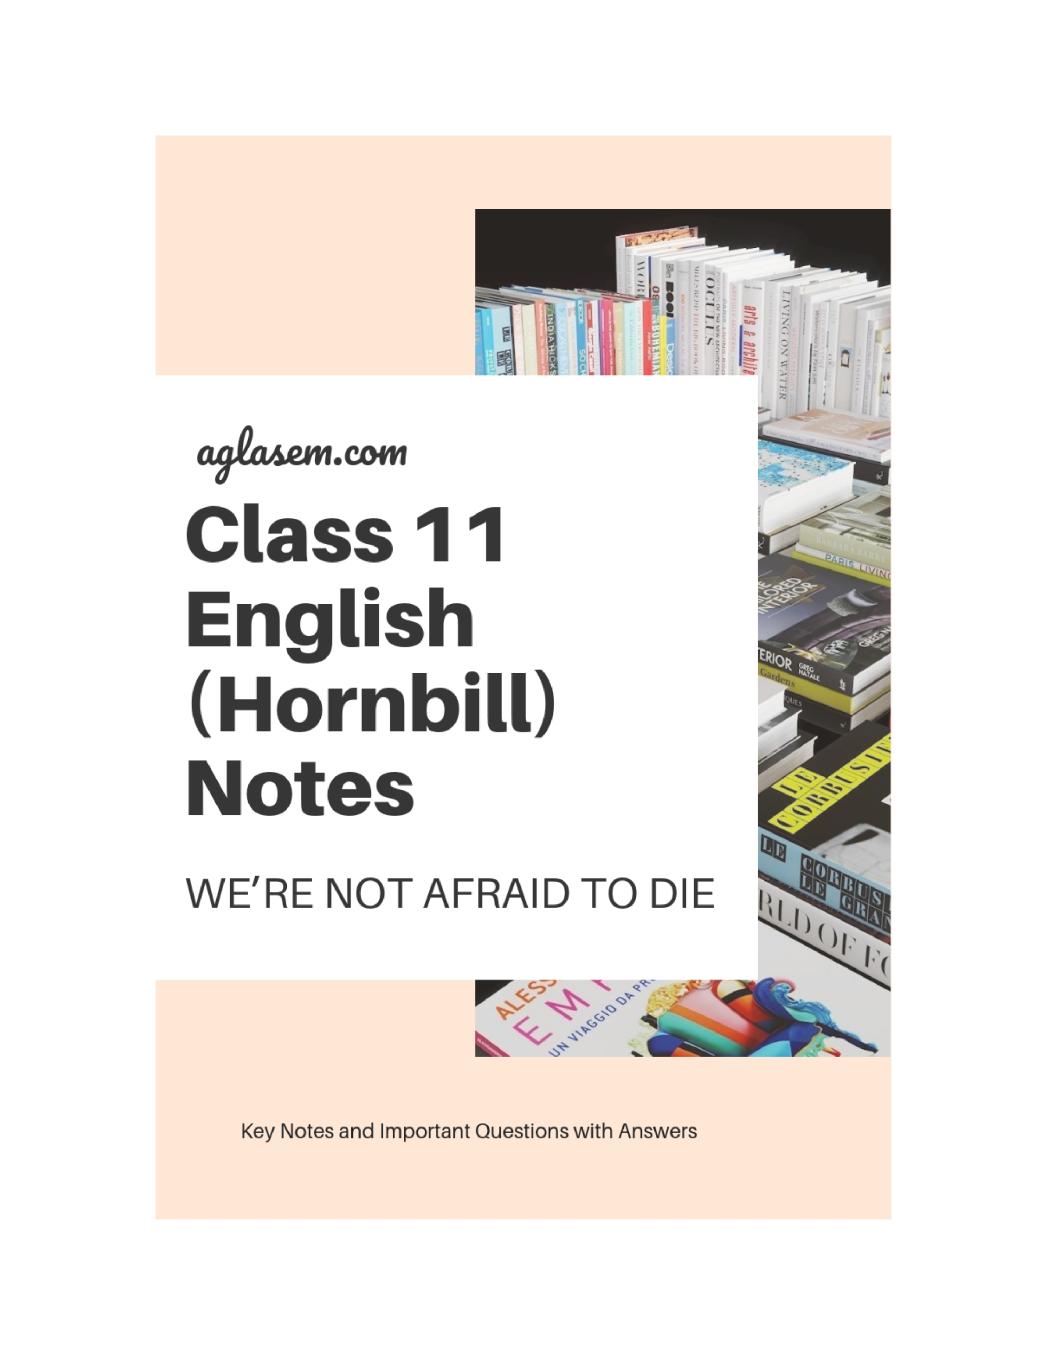 Class 11 English Hornbill Notes For We’re Not Afraid to Die - If We Can all be Together - Page 1